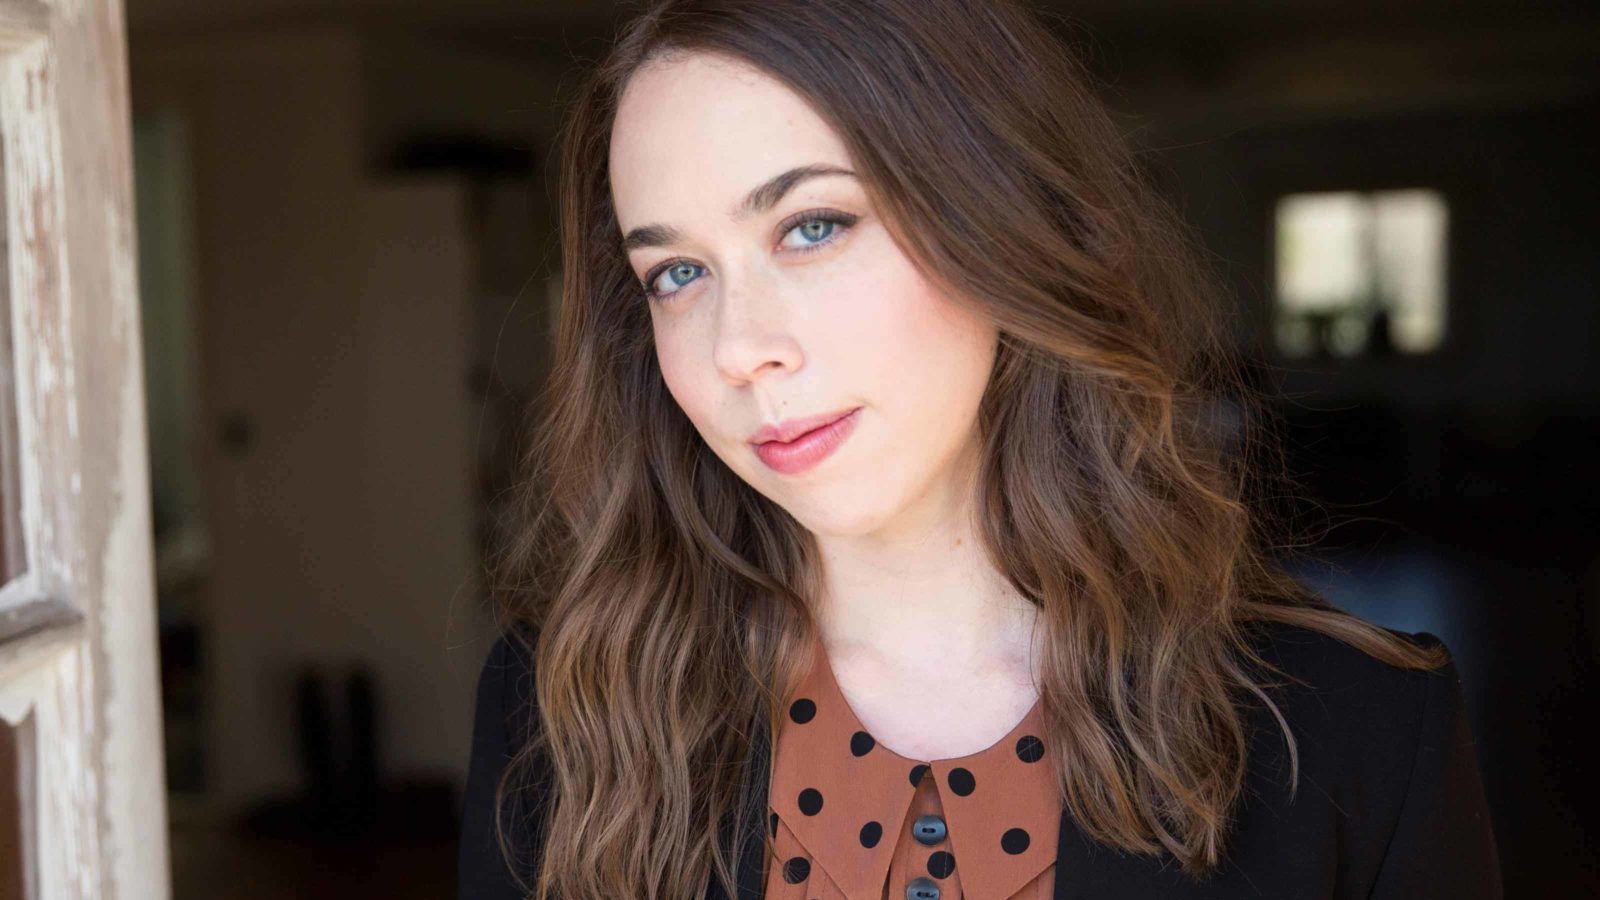 Singer songwriter Sarah Jarosz will perform at the Academy of Music. Press photo courtesy of Signature Sounds